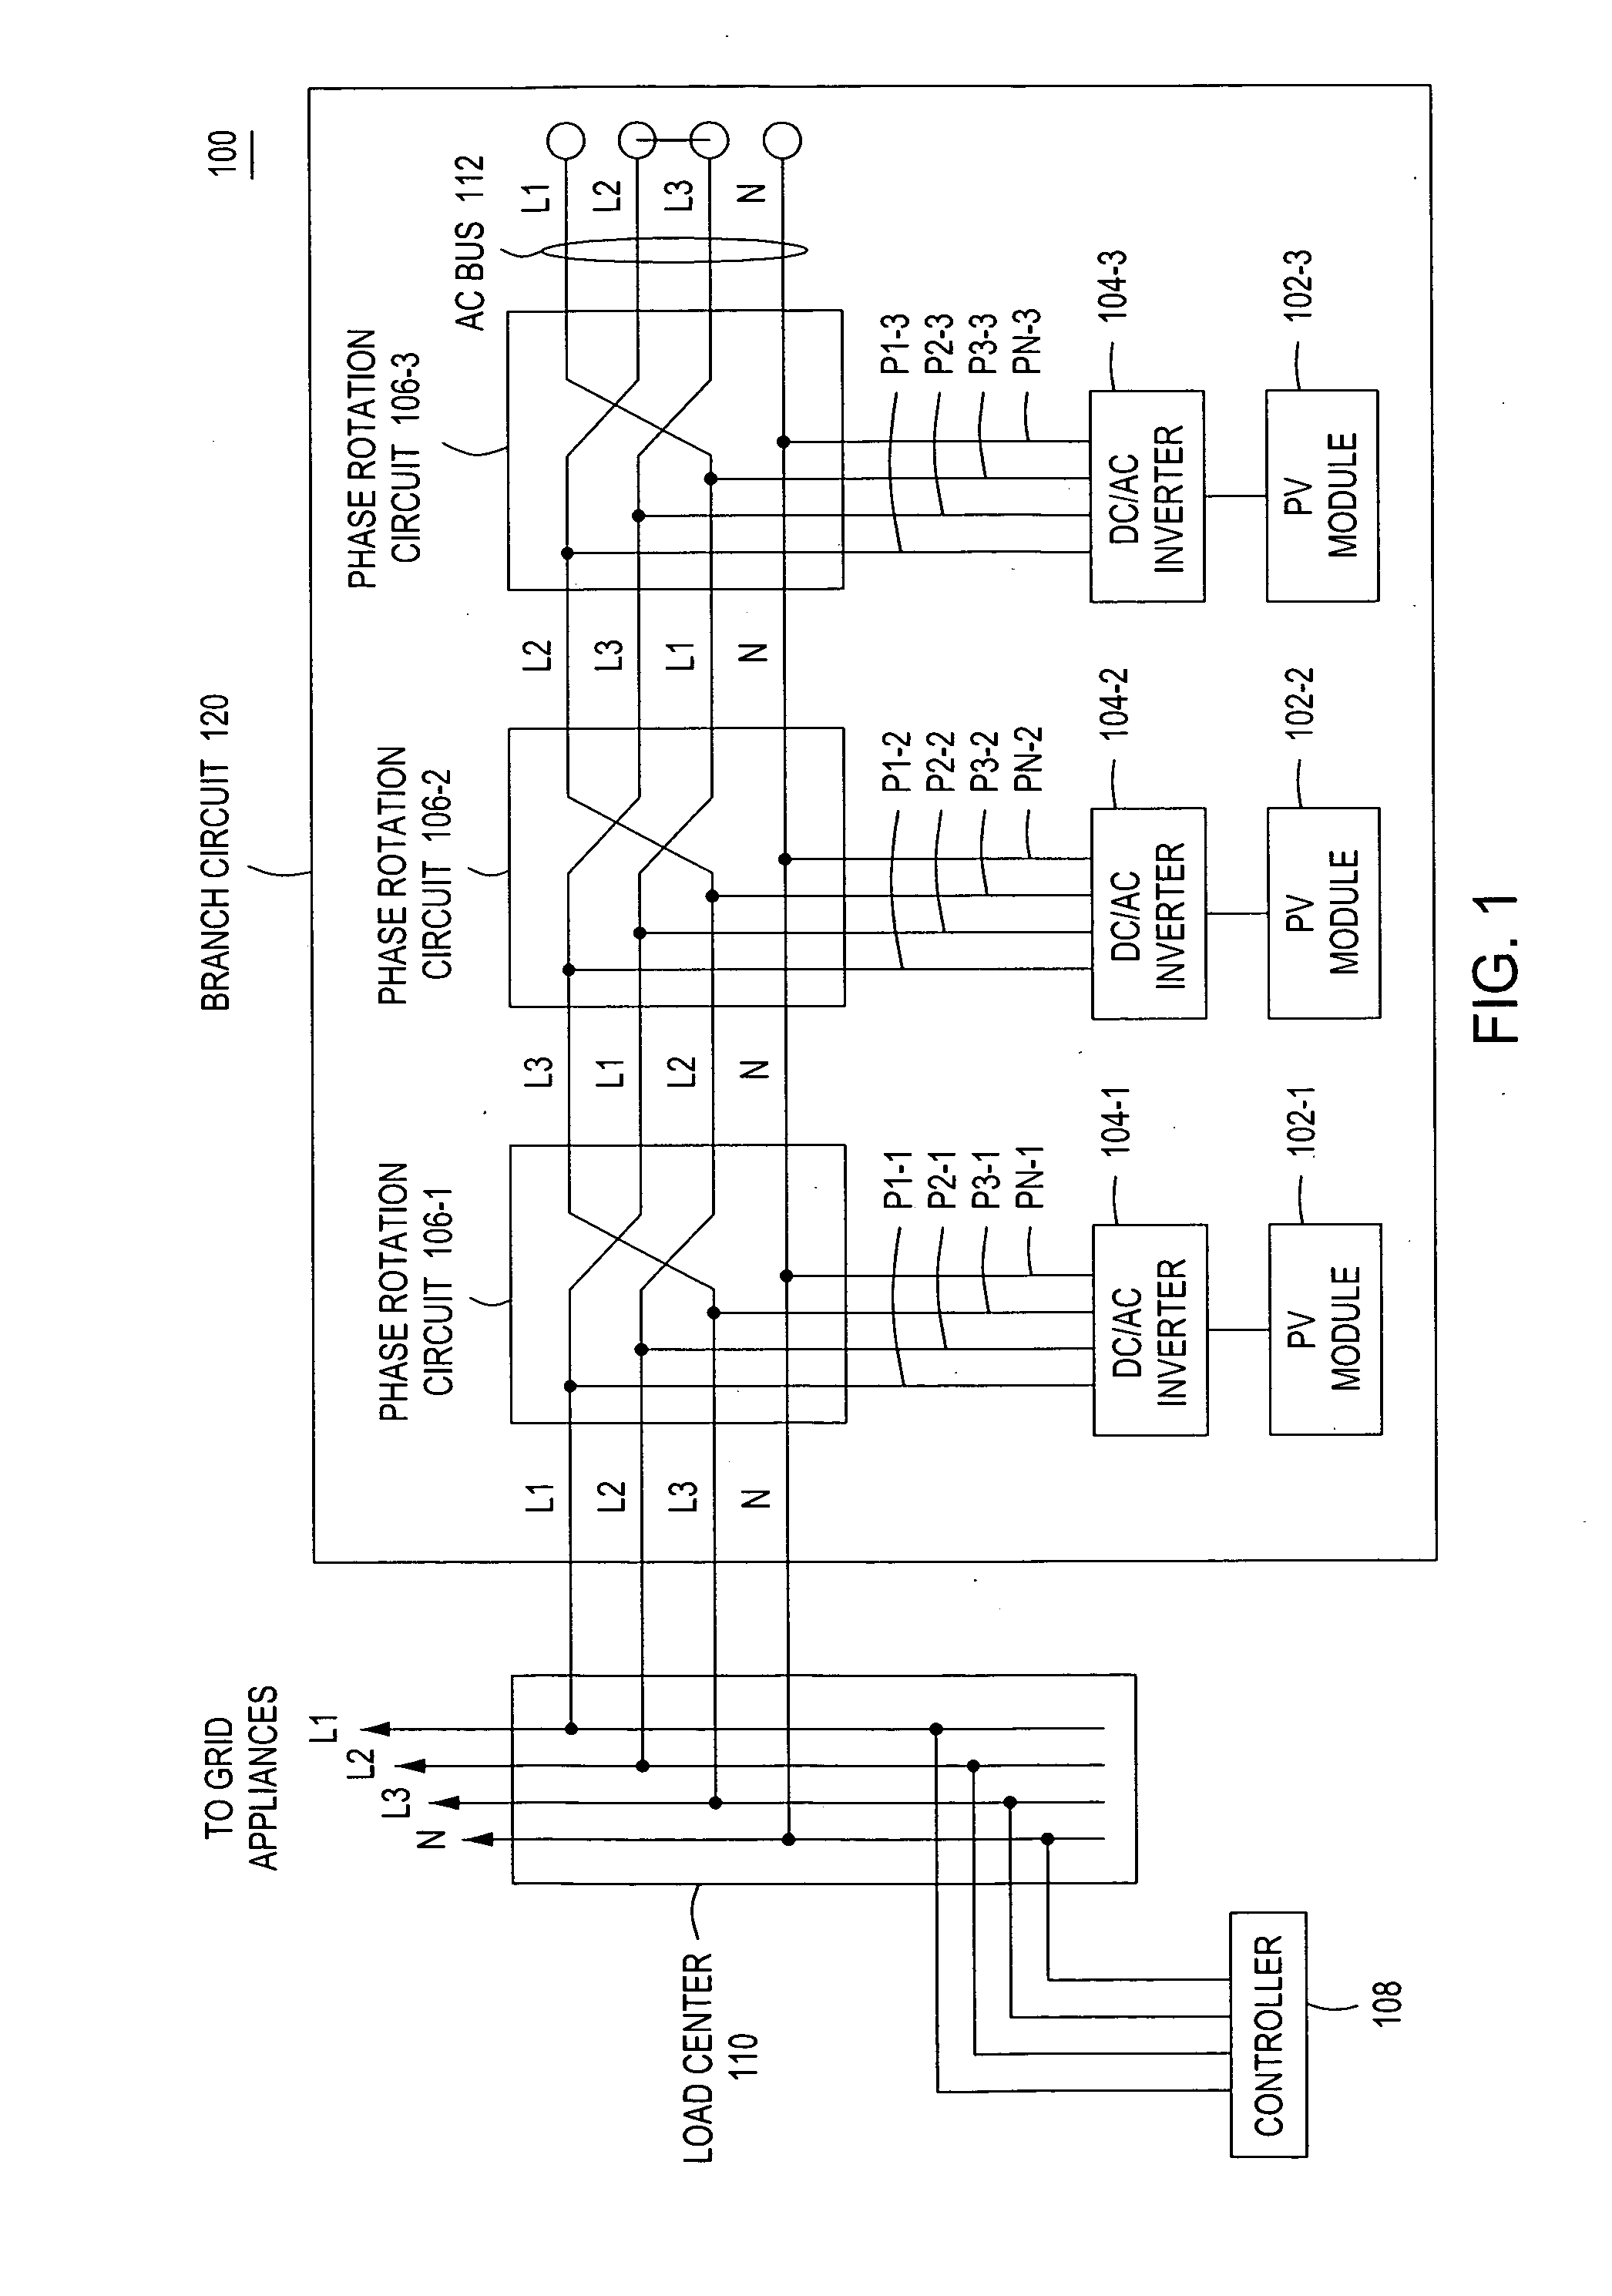 Method and apparatus for distributed power generation